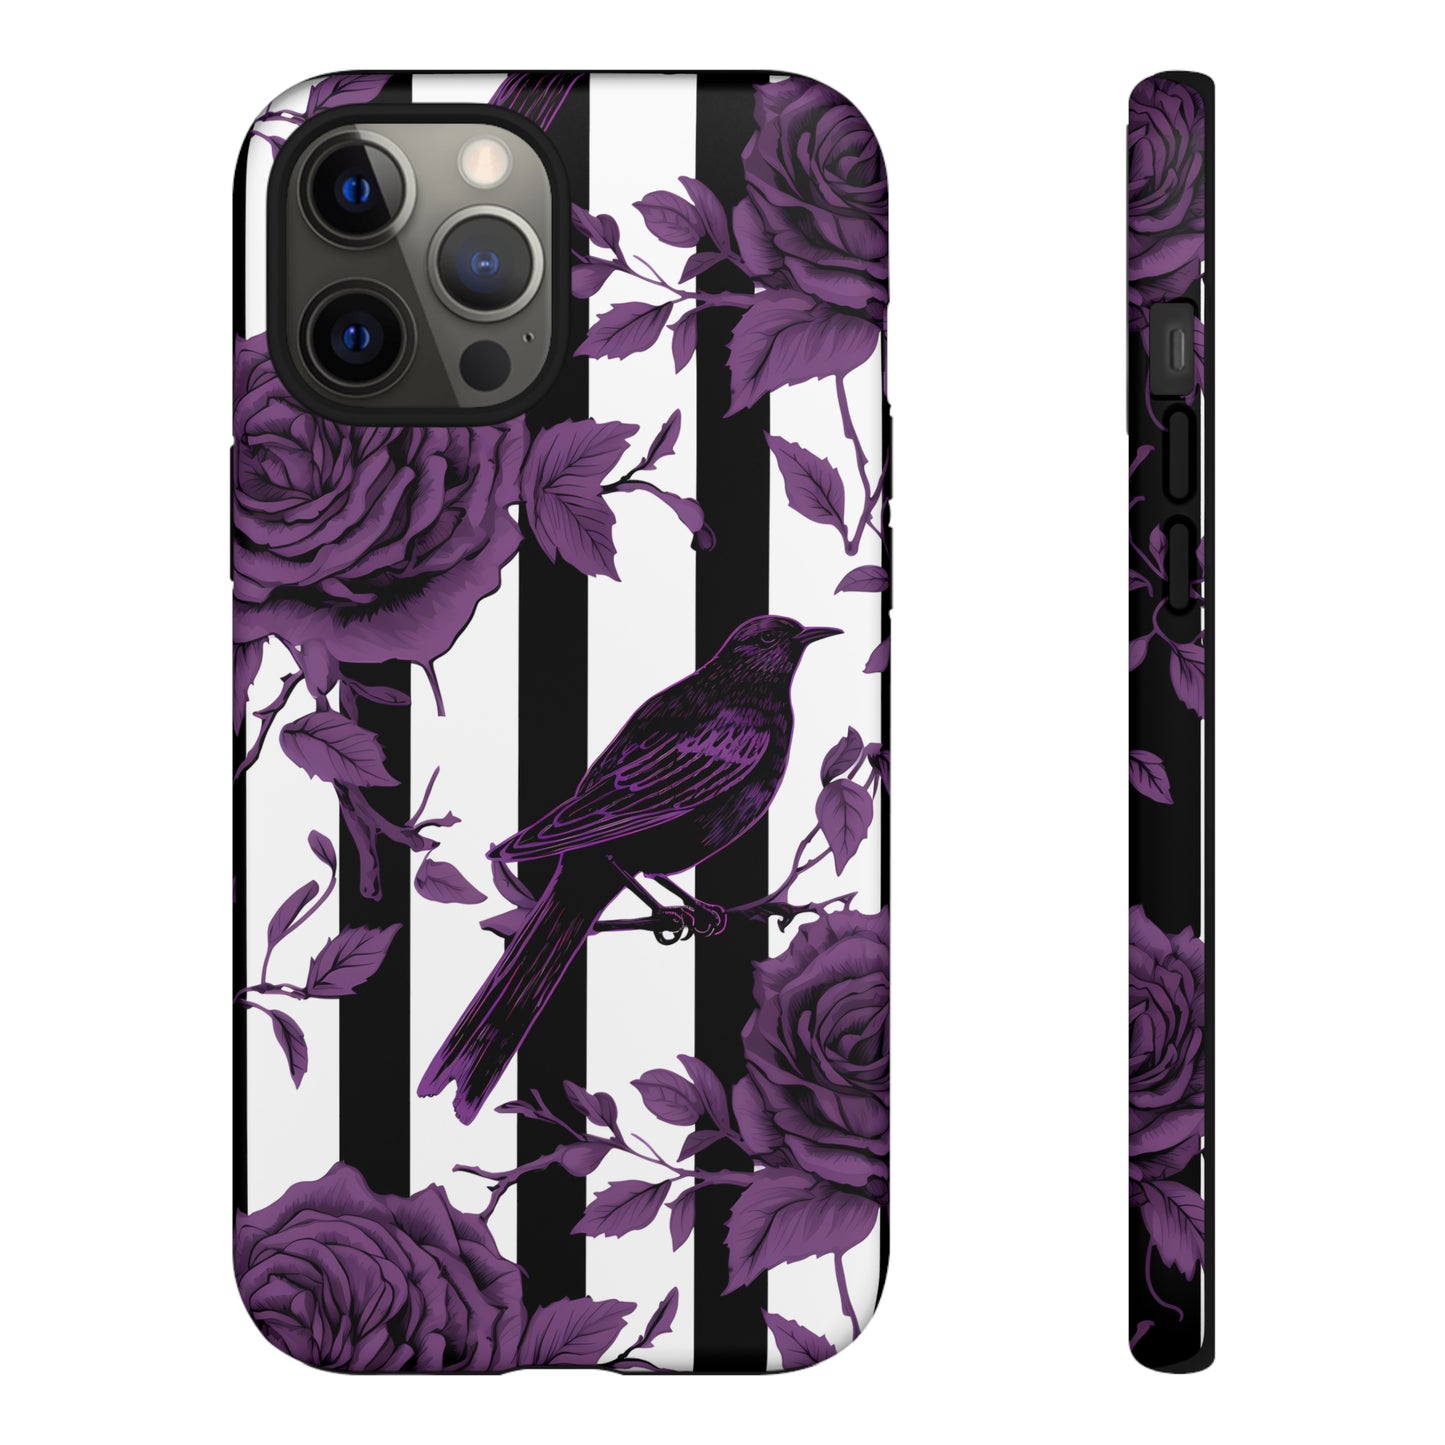 Striped Crows and Roses Tough Cases for iPhone Samsung Google PhonesPhone CaseVTZdesignsiPhone 12 Pro MaxMatteAccessoriescrowsGlossy